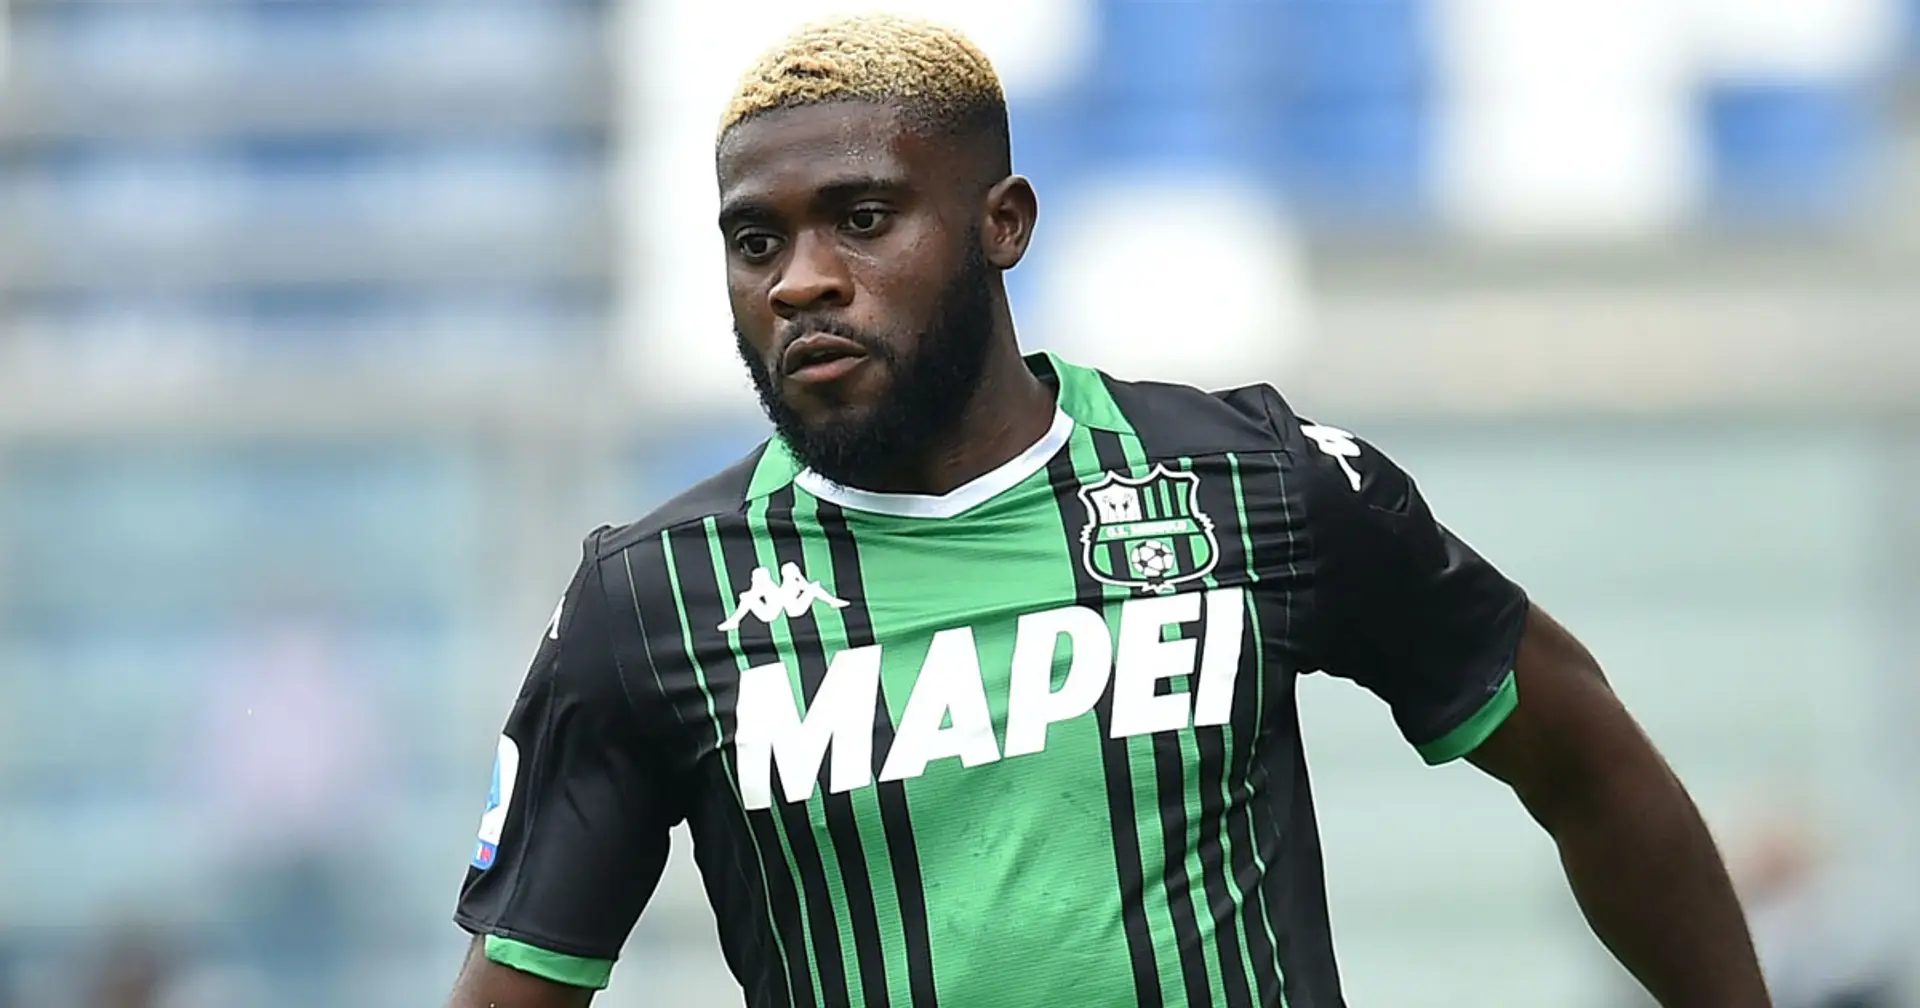 'There's more goals and there's more assists': Jeremie Boga explains how he has improved over the years